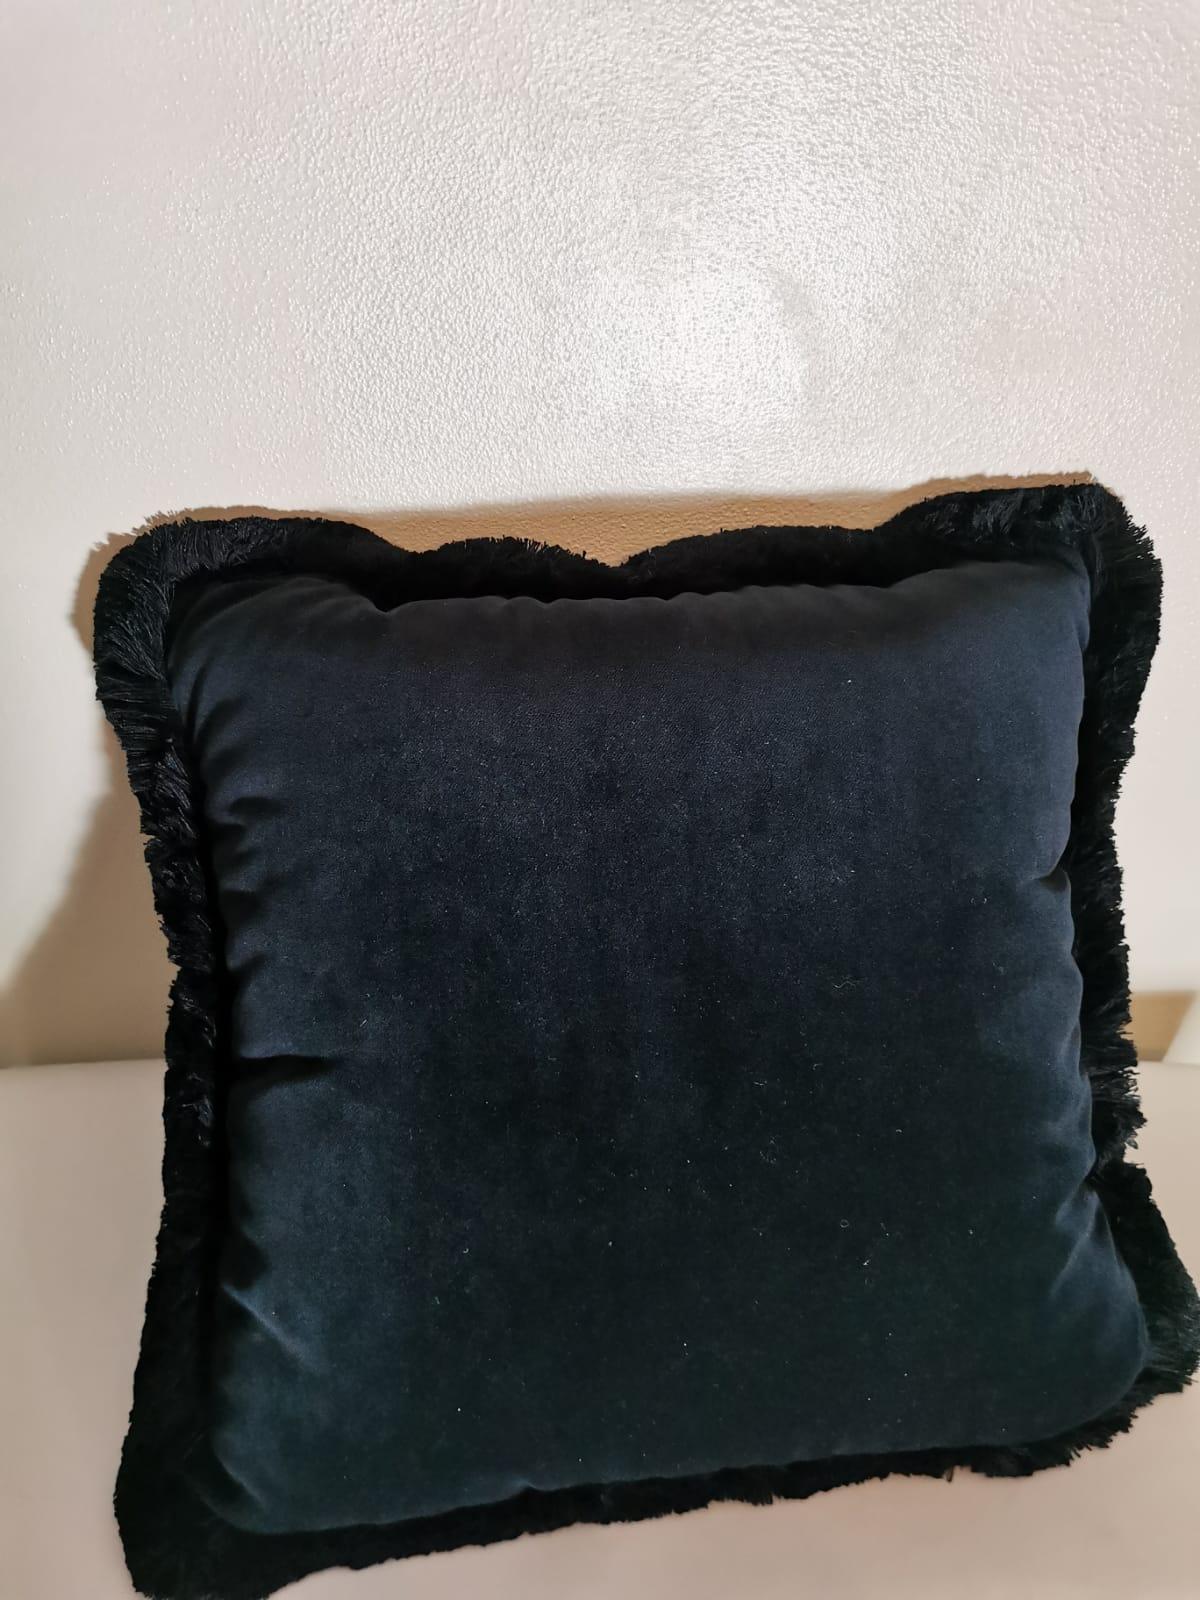 A velvet and polyester pillow with black trimmings from the 